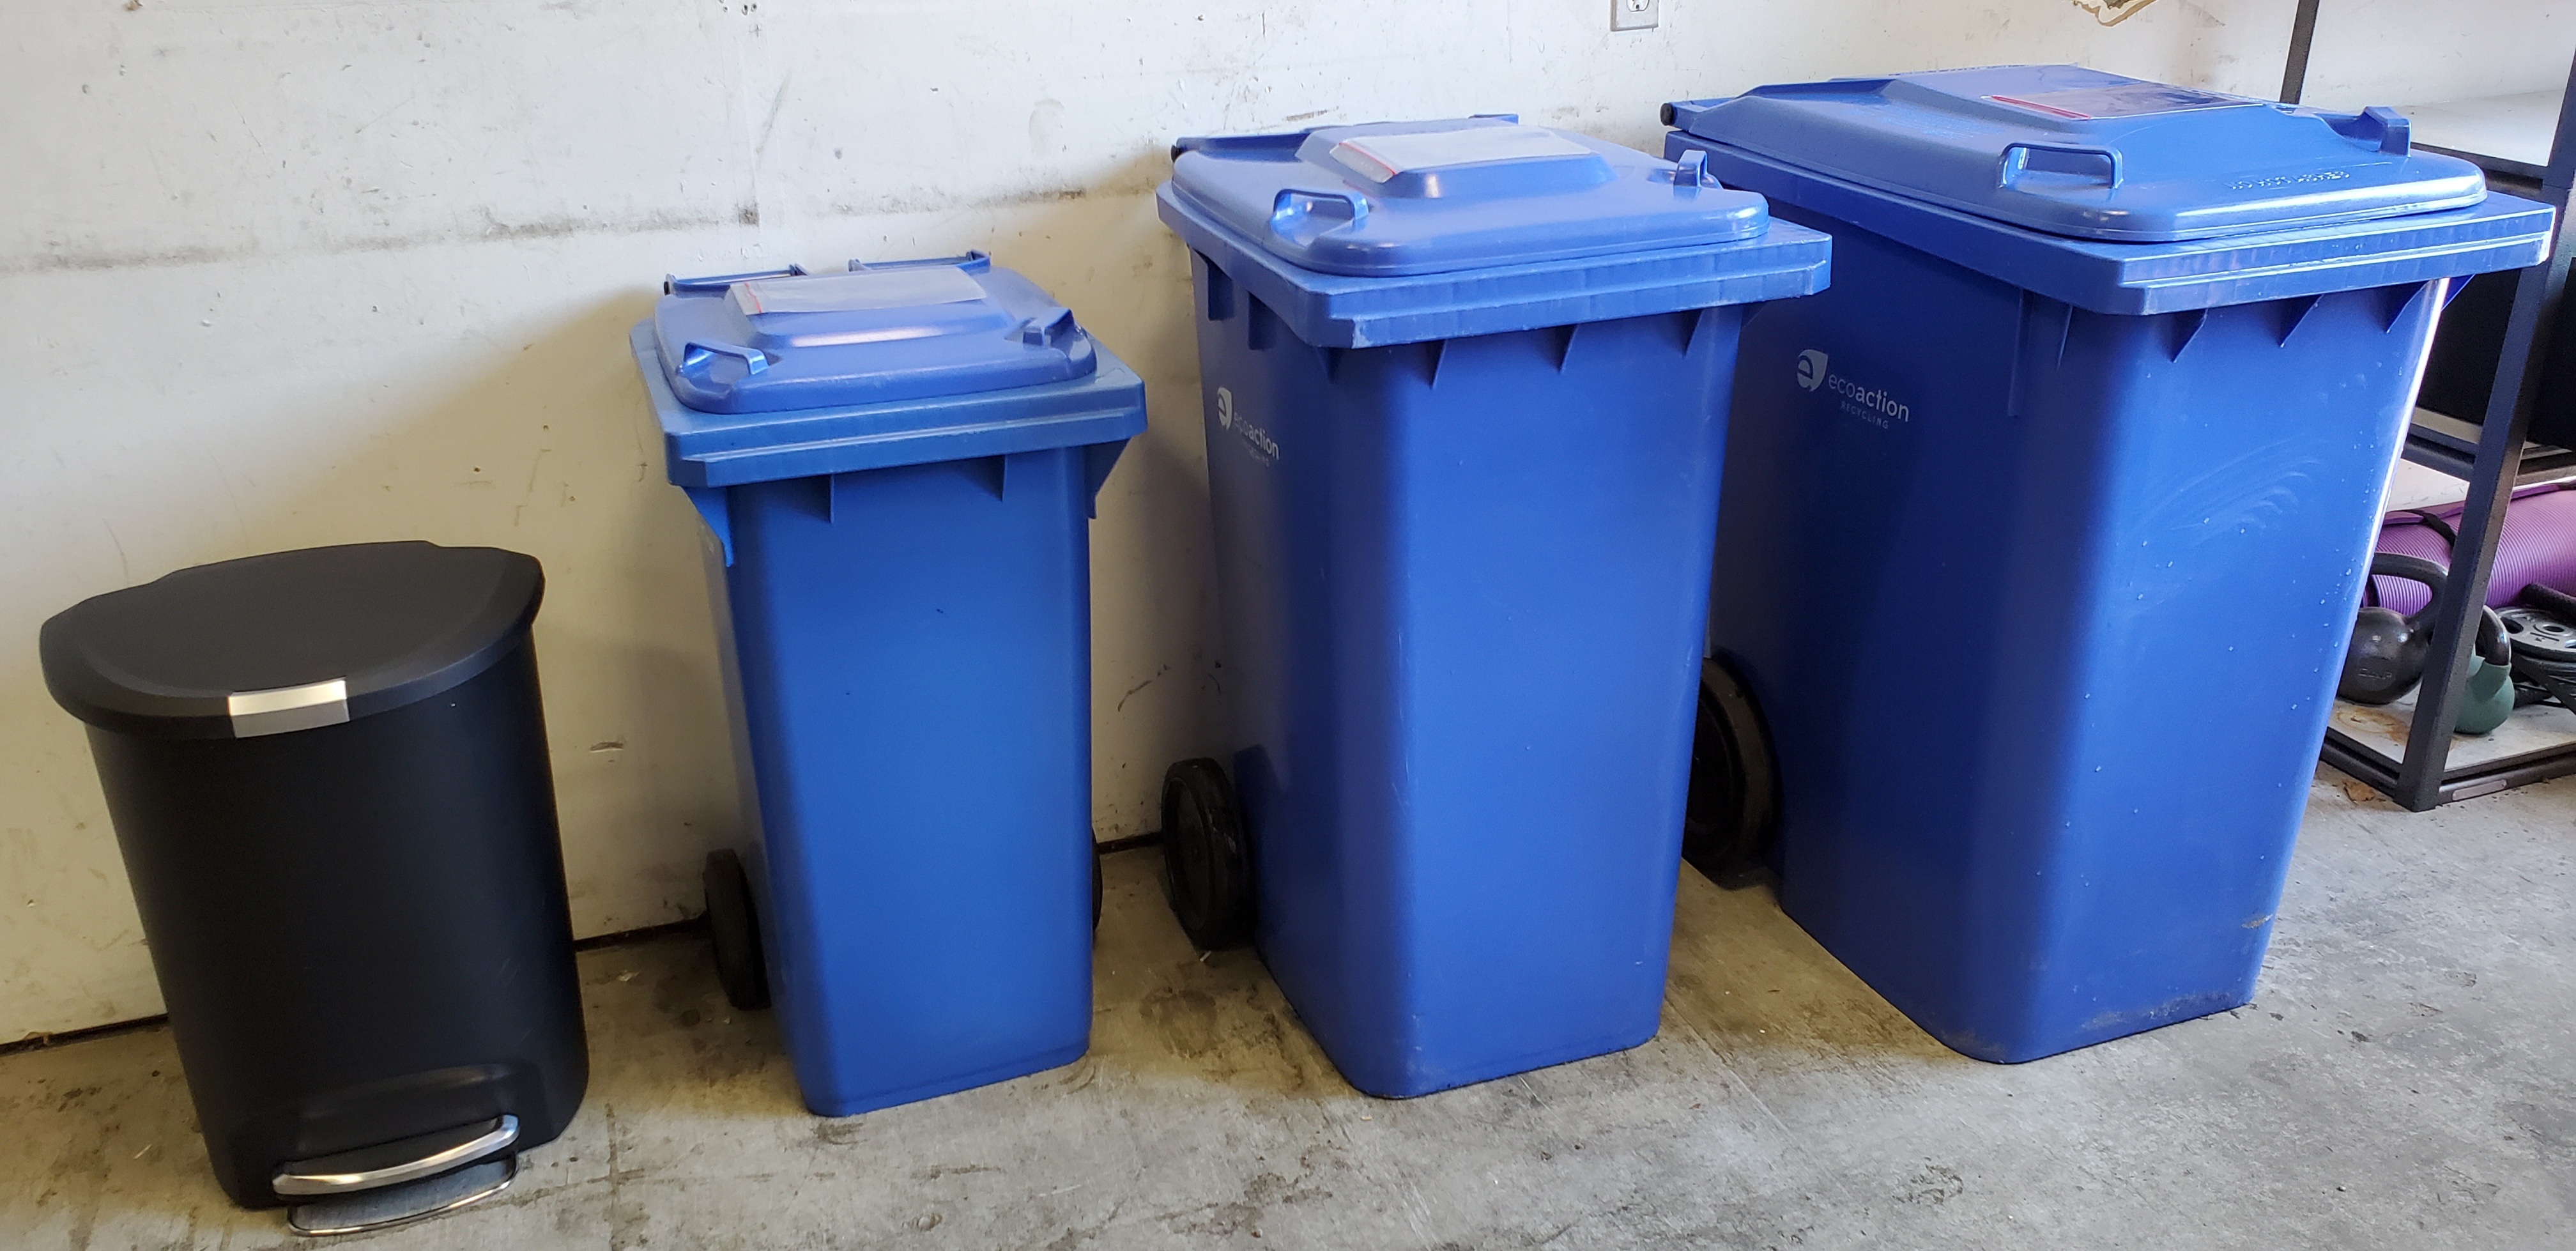 Soft Plastics Recycling - EcoAction Recycling - Serving Greater Vancouver